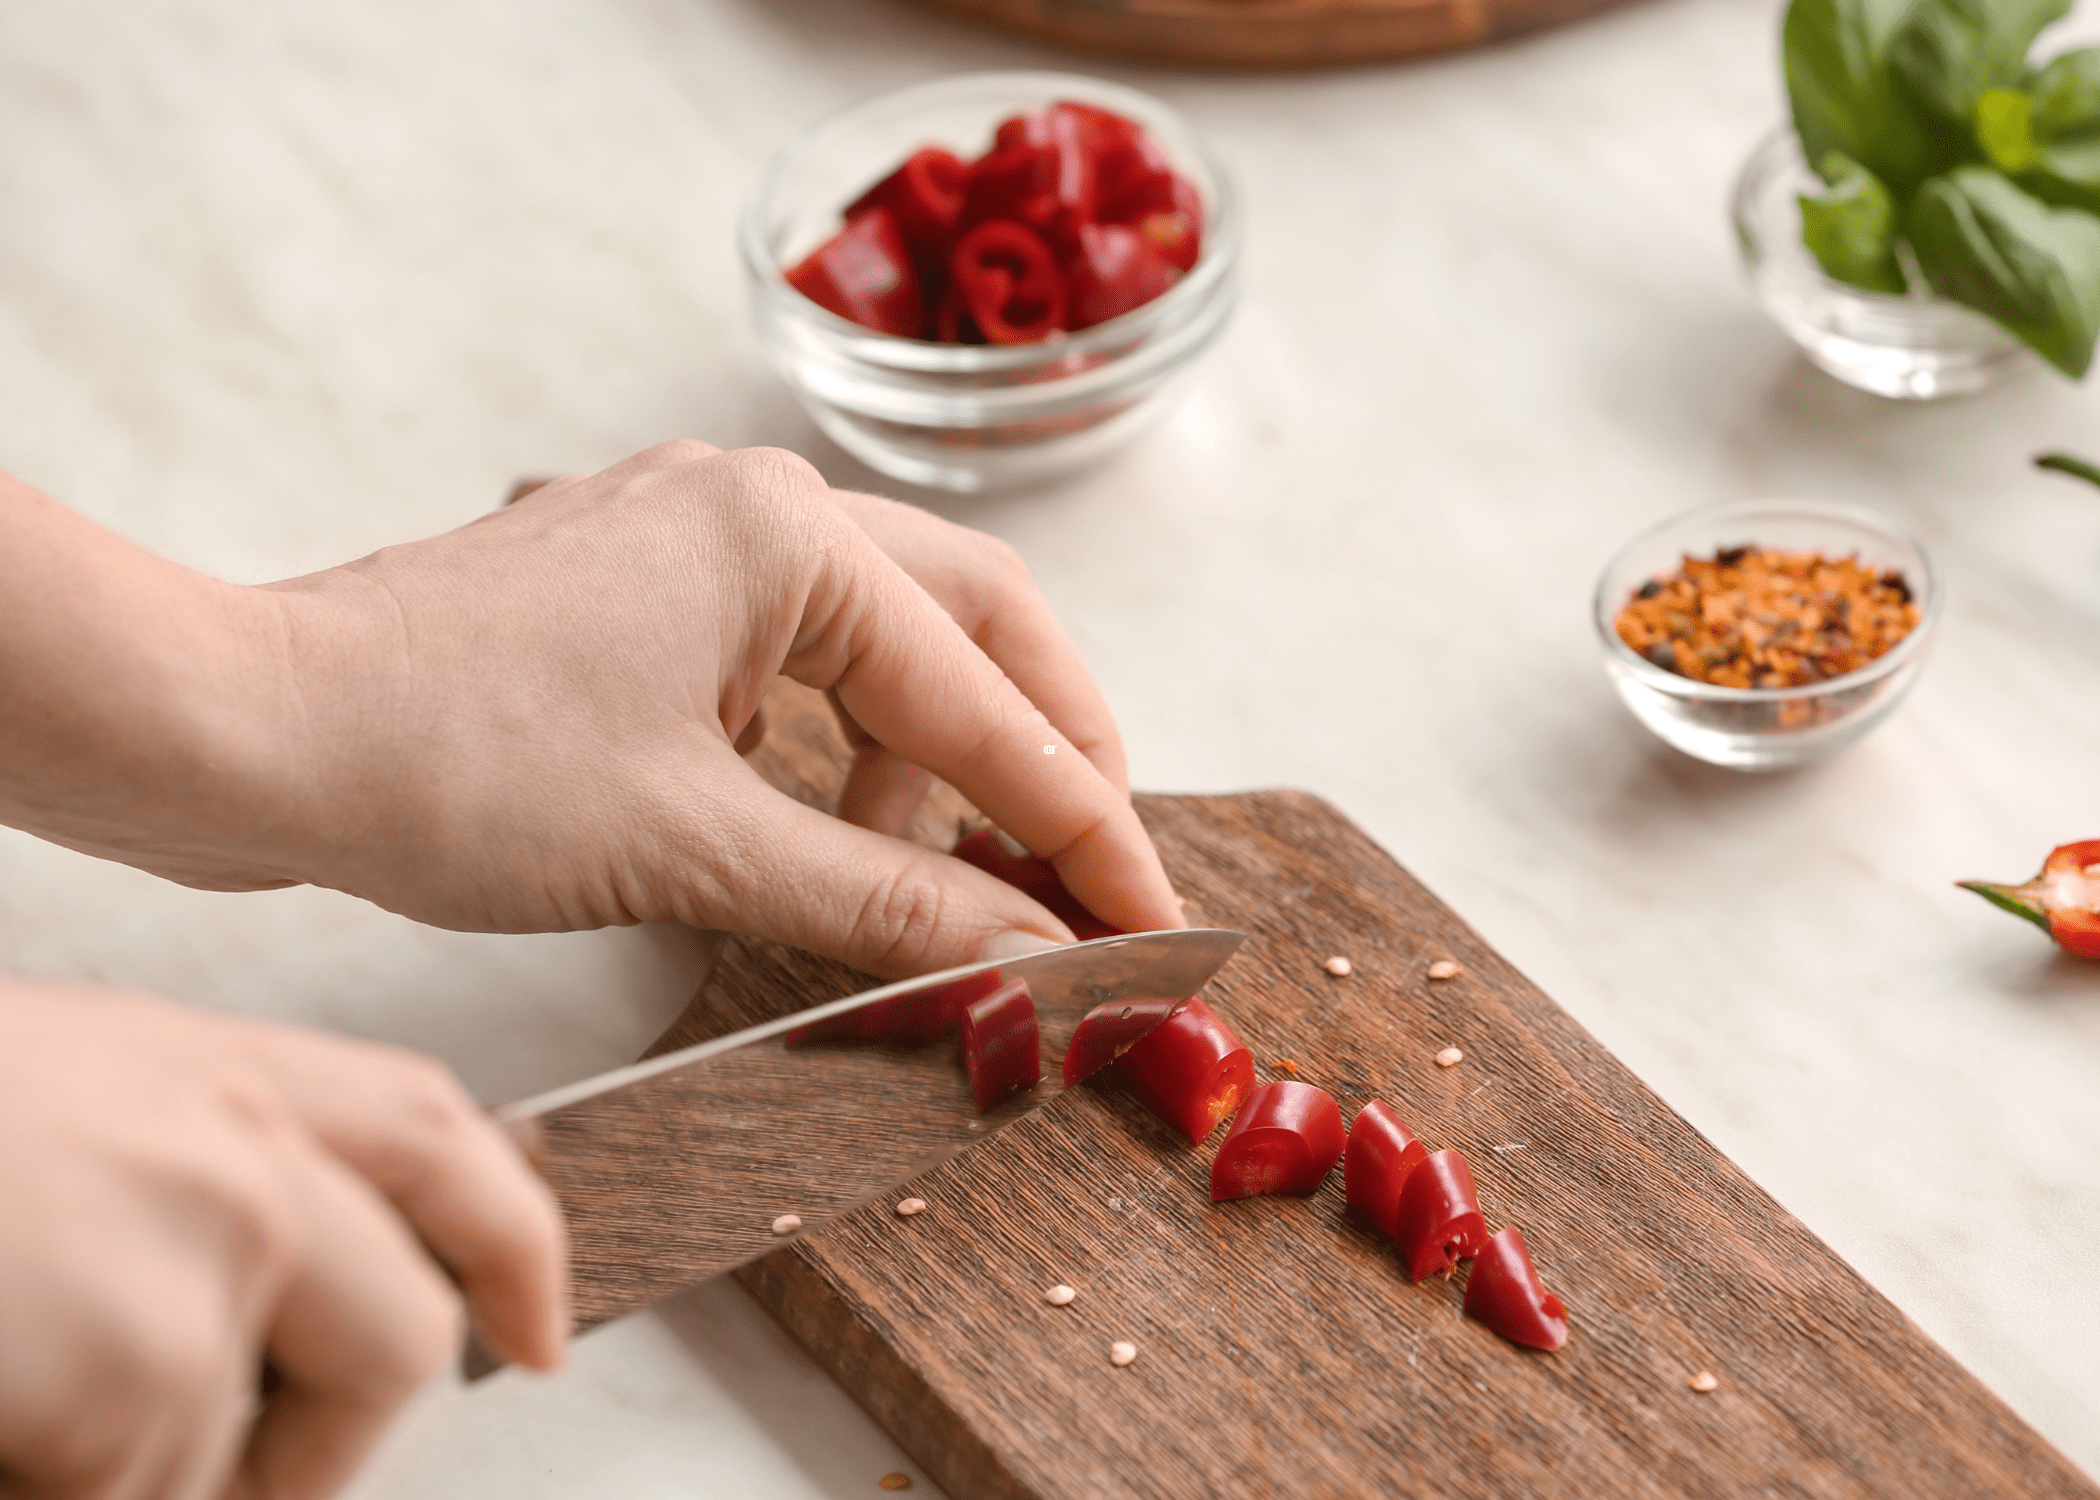 cutting red chili peppers on wood cutting board